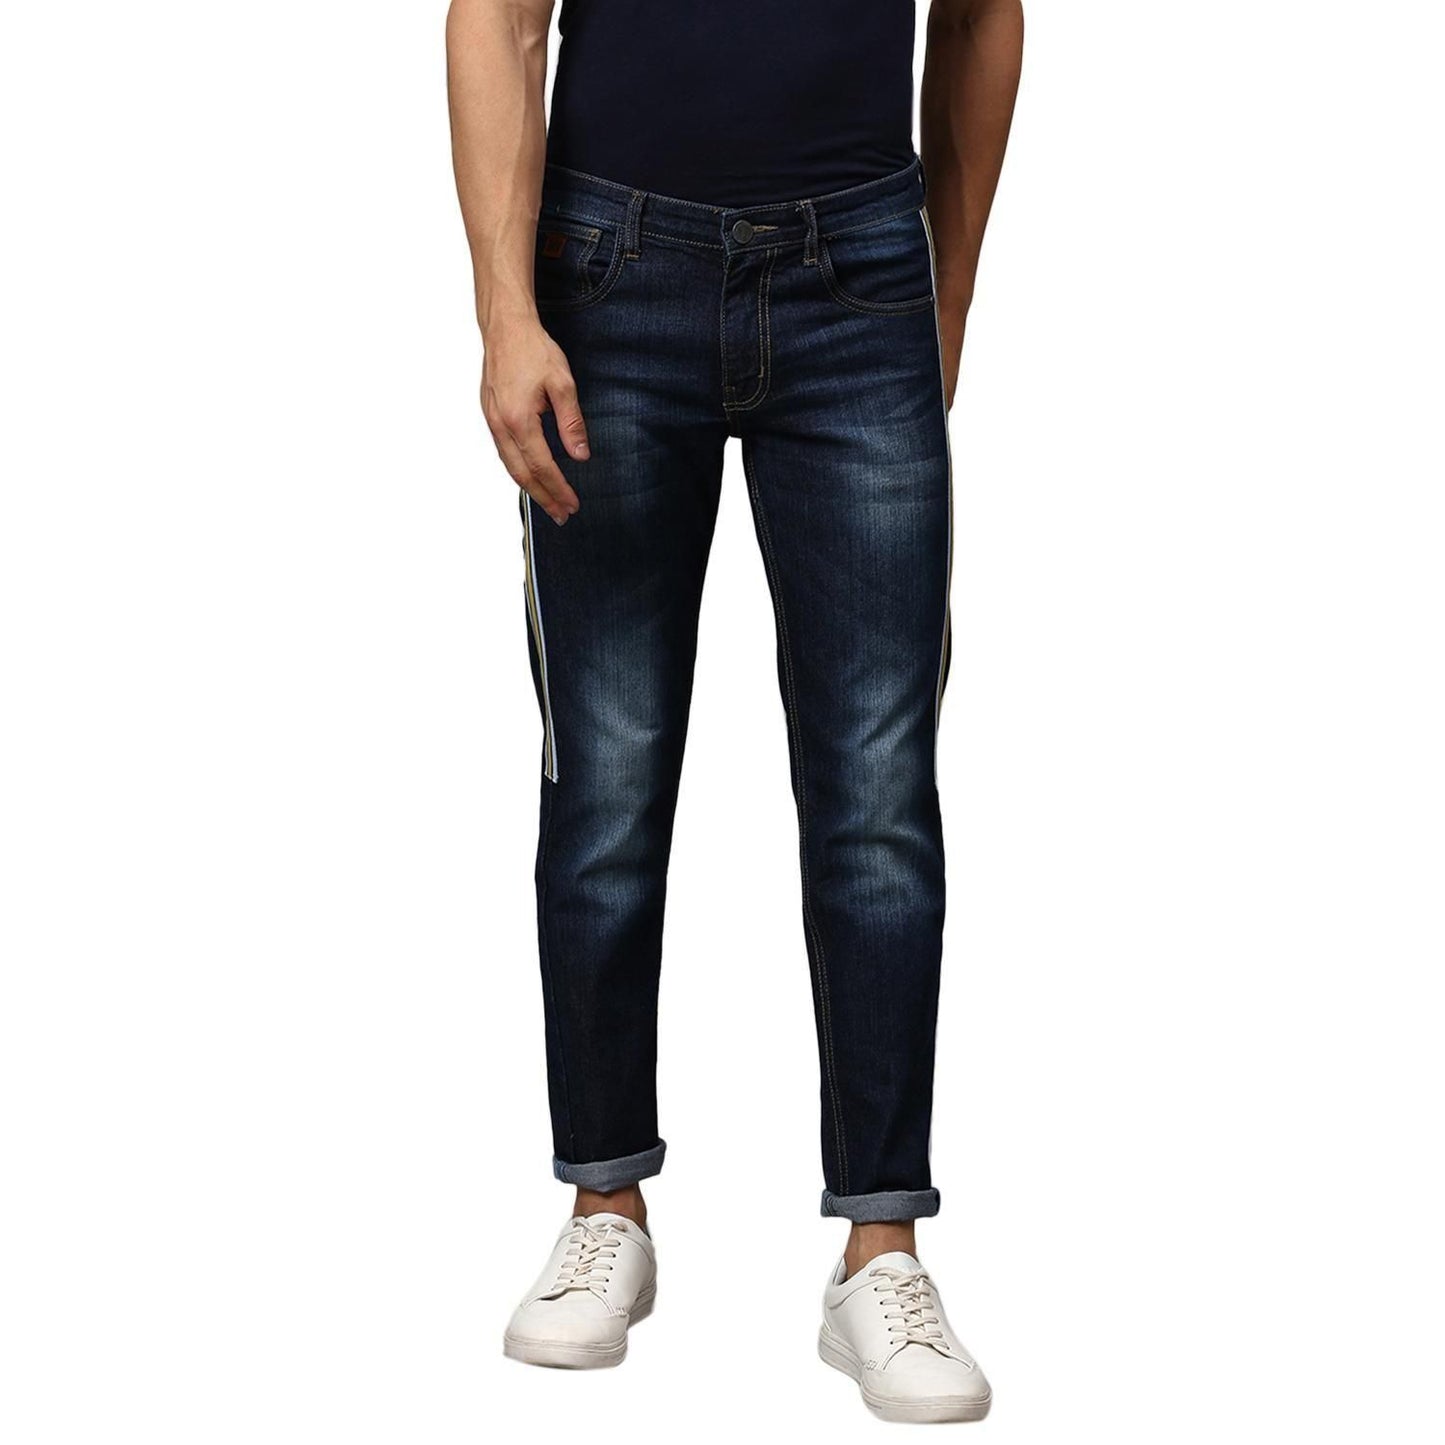 Campus Sutra Denim Washed with Side Tape Slim Fit Jeans